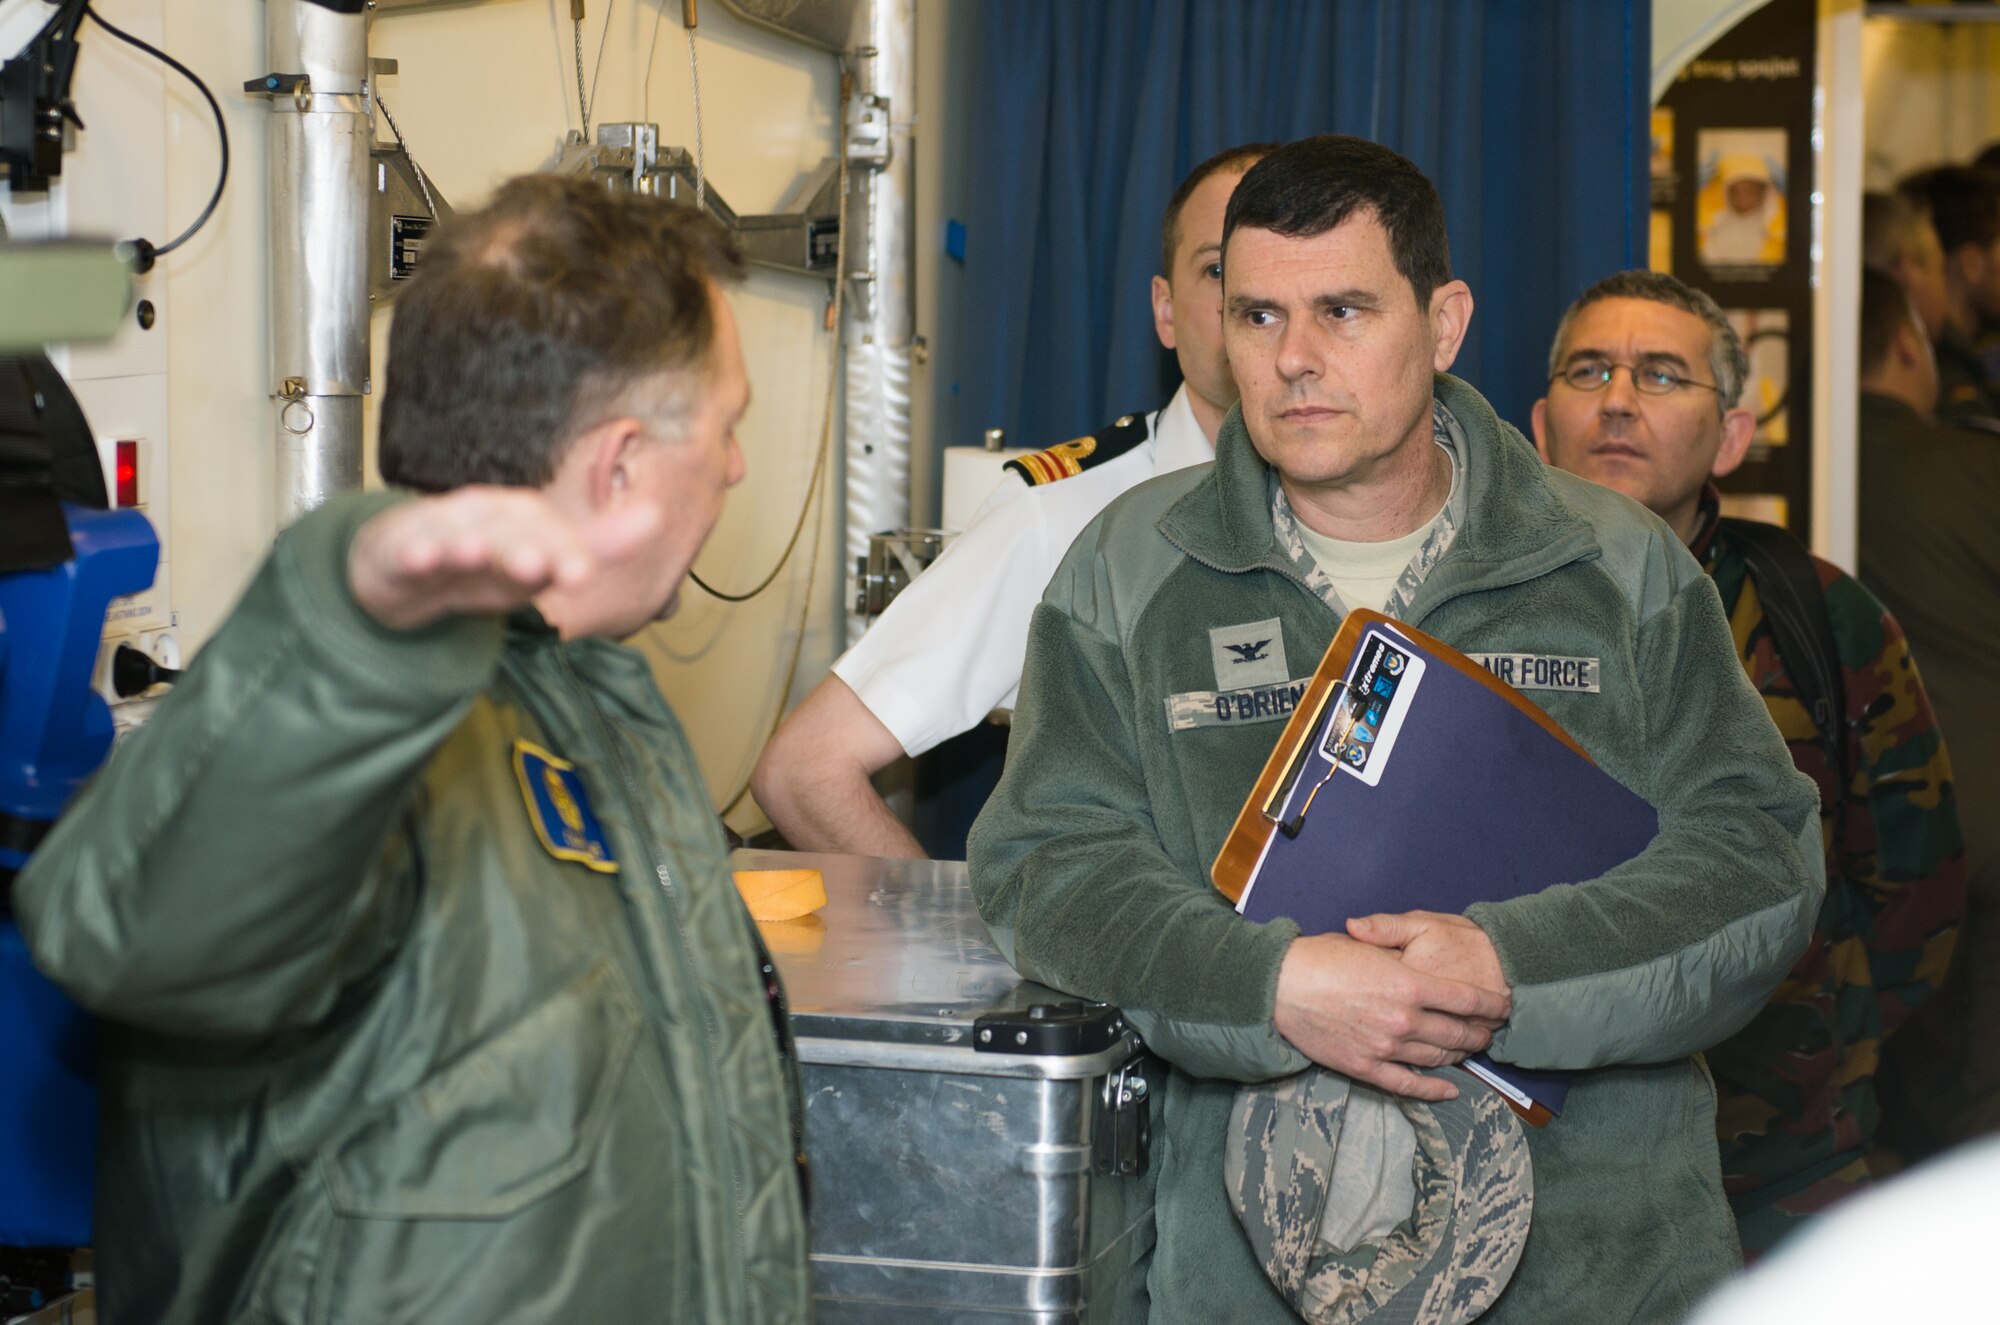 U.S. Air Force Col. David O’Brien, U.S. Transportation Command surgeon, listens to Royal Danish air force Maj. Claus Lie, 690th Squadron chief surgeon, at Ramstein Air Base, Germany, March 11, 2015. O’Brien and Lie both attended the Ramstein Aerospace Medicine Summit and NATO Science and Technology Organization Technical Course to learn and develop each other’s medical skills. (U.S. Air Force photo/Staff Sgt. Armando A. Schwier-Morales) 